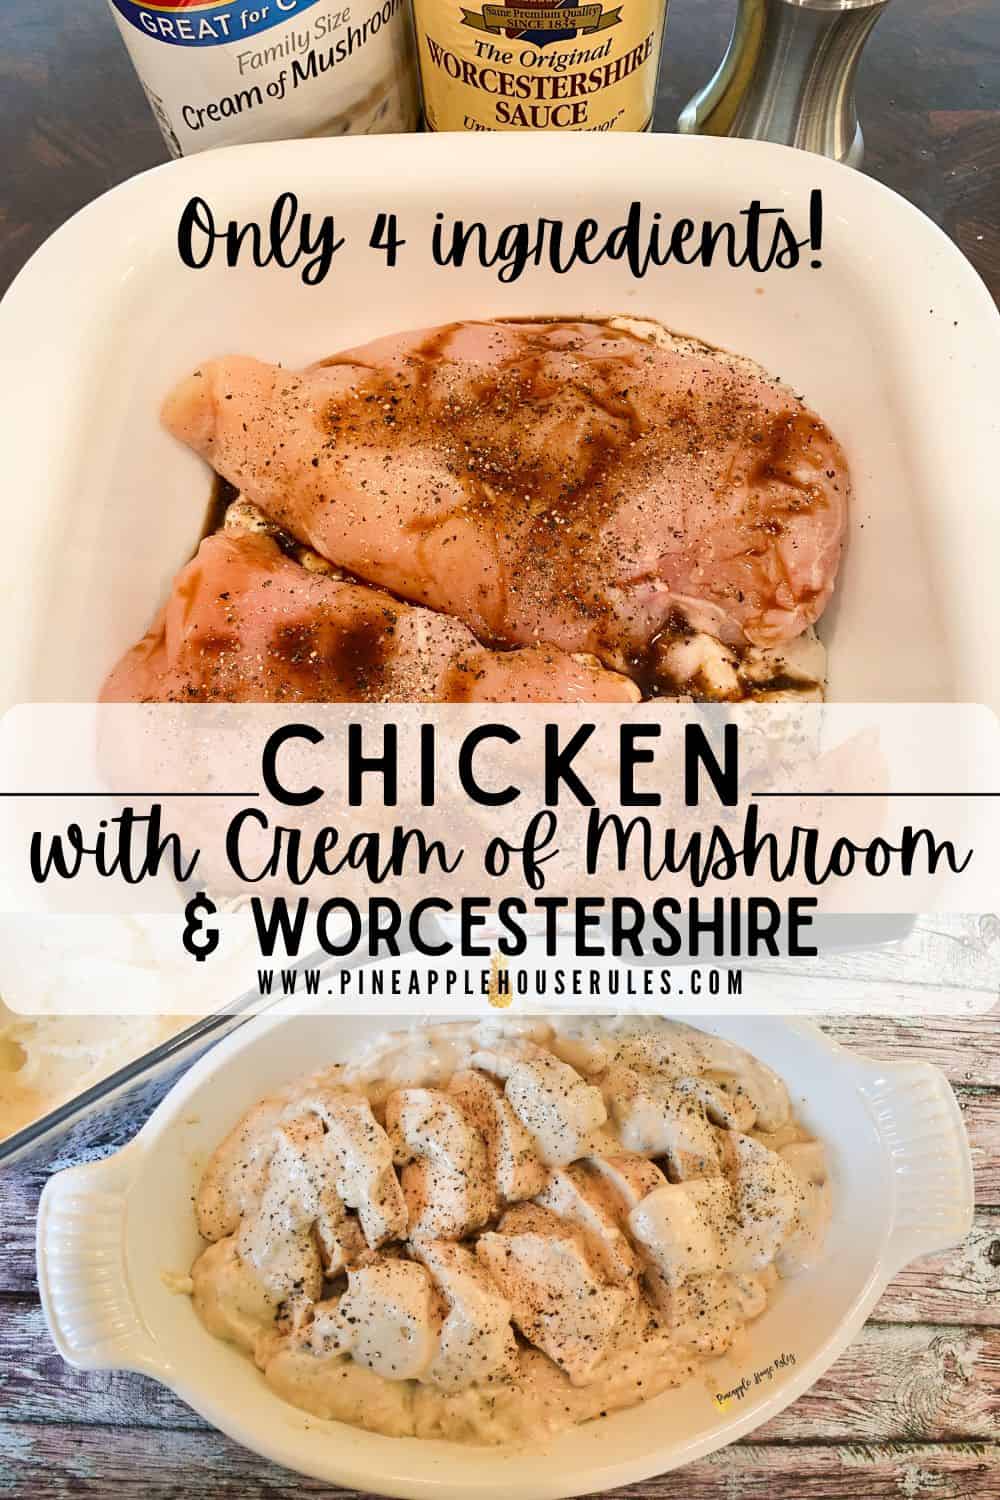 This Chicken with Cream of Mushroom and Worcestershire is EXACTLY as it sounds. Using JUST 4 INGREDIENTS, you’re on your way to an easy, delicious dinner. Serve over rice for a great comfort food dinner. Chicken Breast Recipes | Chicken Breast Recipes Healthy | Chicken Breast Recipes Oven | Chicken Breast Recipes Easy | Chicken Breast Dinner Ideas | Cream of Mushroom Chicken | Cream of Mushroom Recipes | Worcestershire Sauce Recipes | Easy Dinner Recipes | Easy Dinner Recipes Healthy